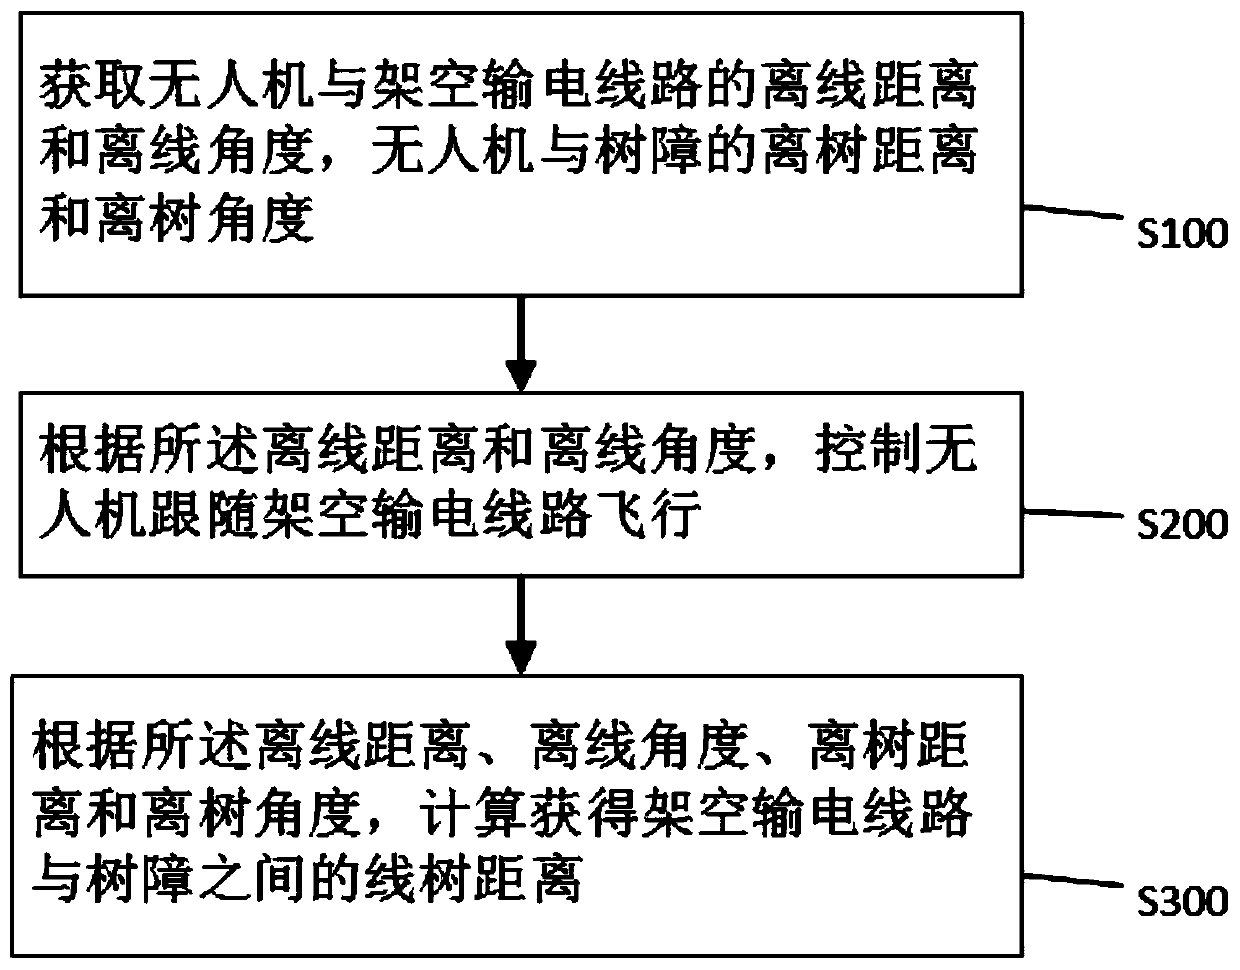 Tree obstacle information collection method for overhead transmission line